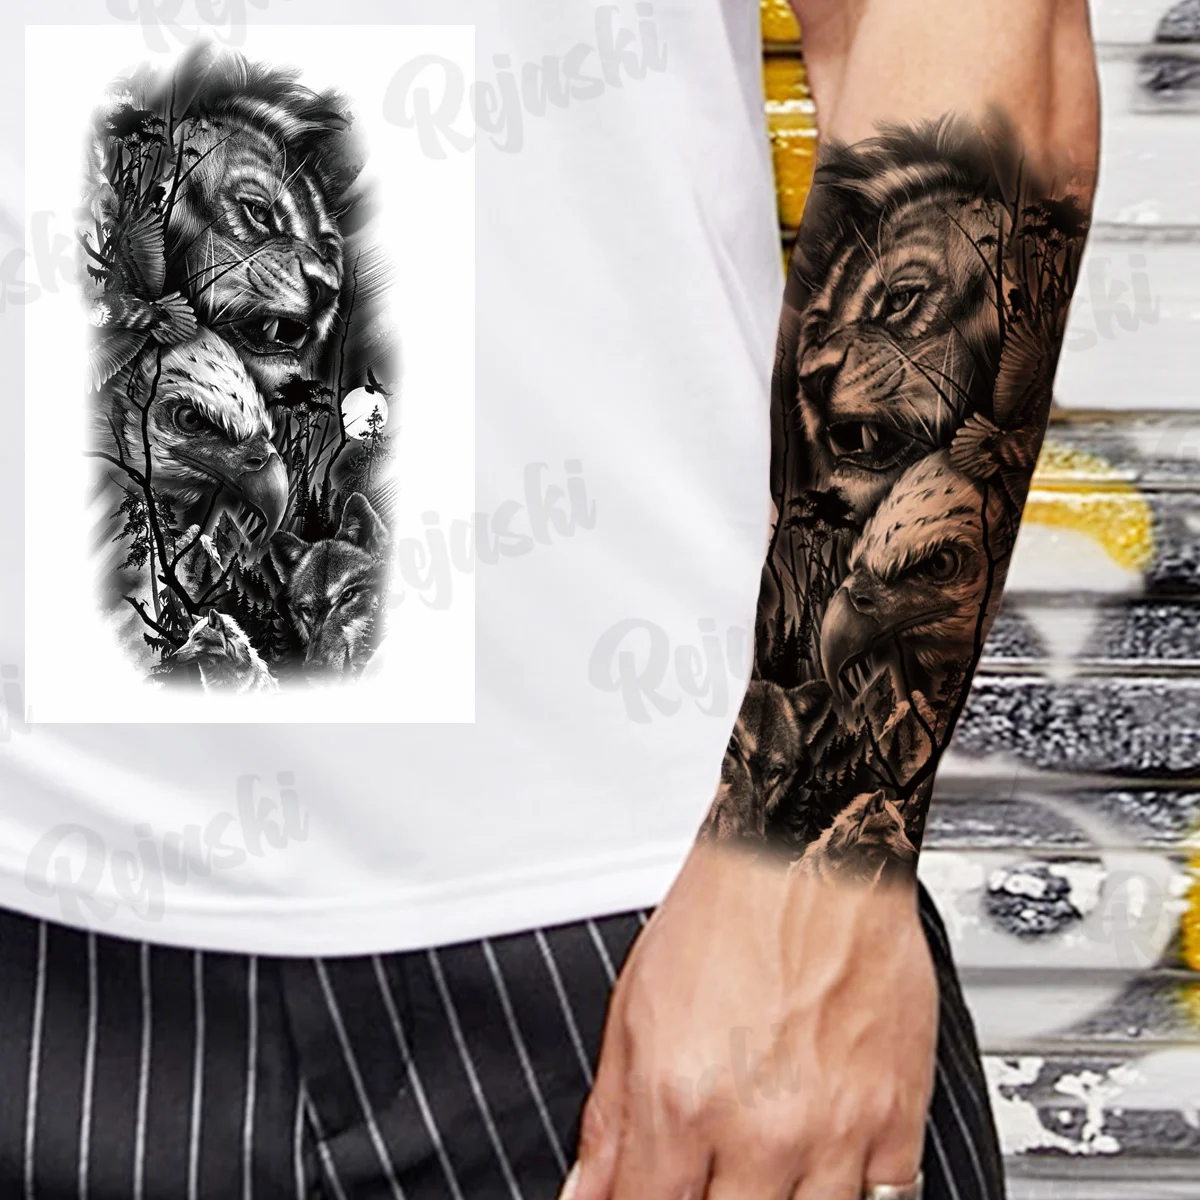 Black Lion Eagle Temporary Tattoos For Men Adults Realistic Skull Scary Wings Tiger Compass Fake Tattoo Sticker Arm Body Tatoos